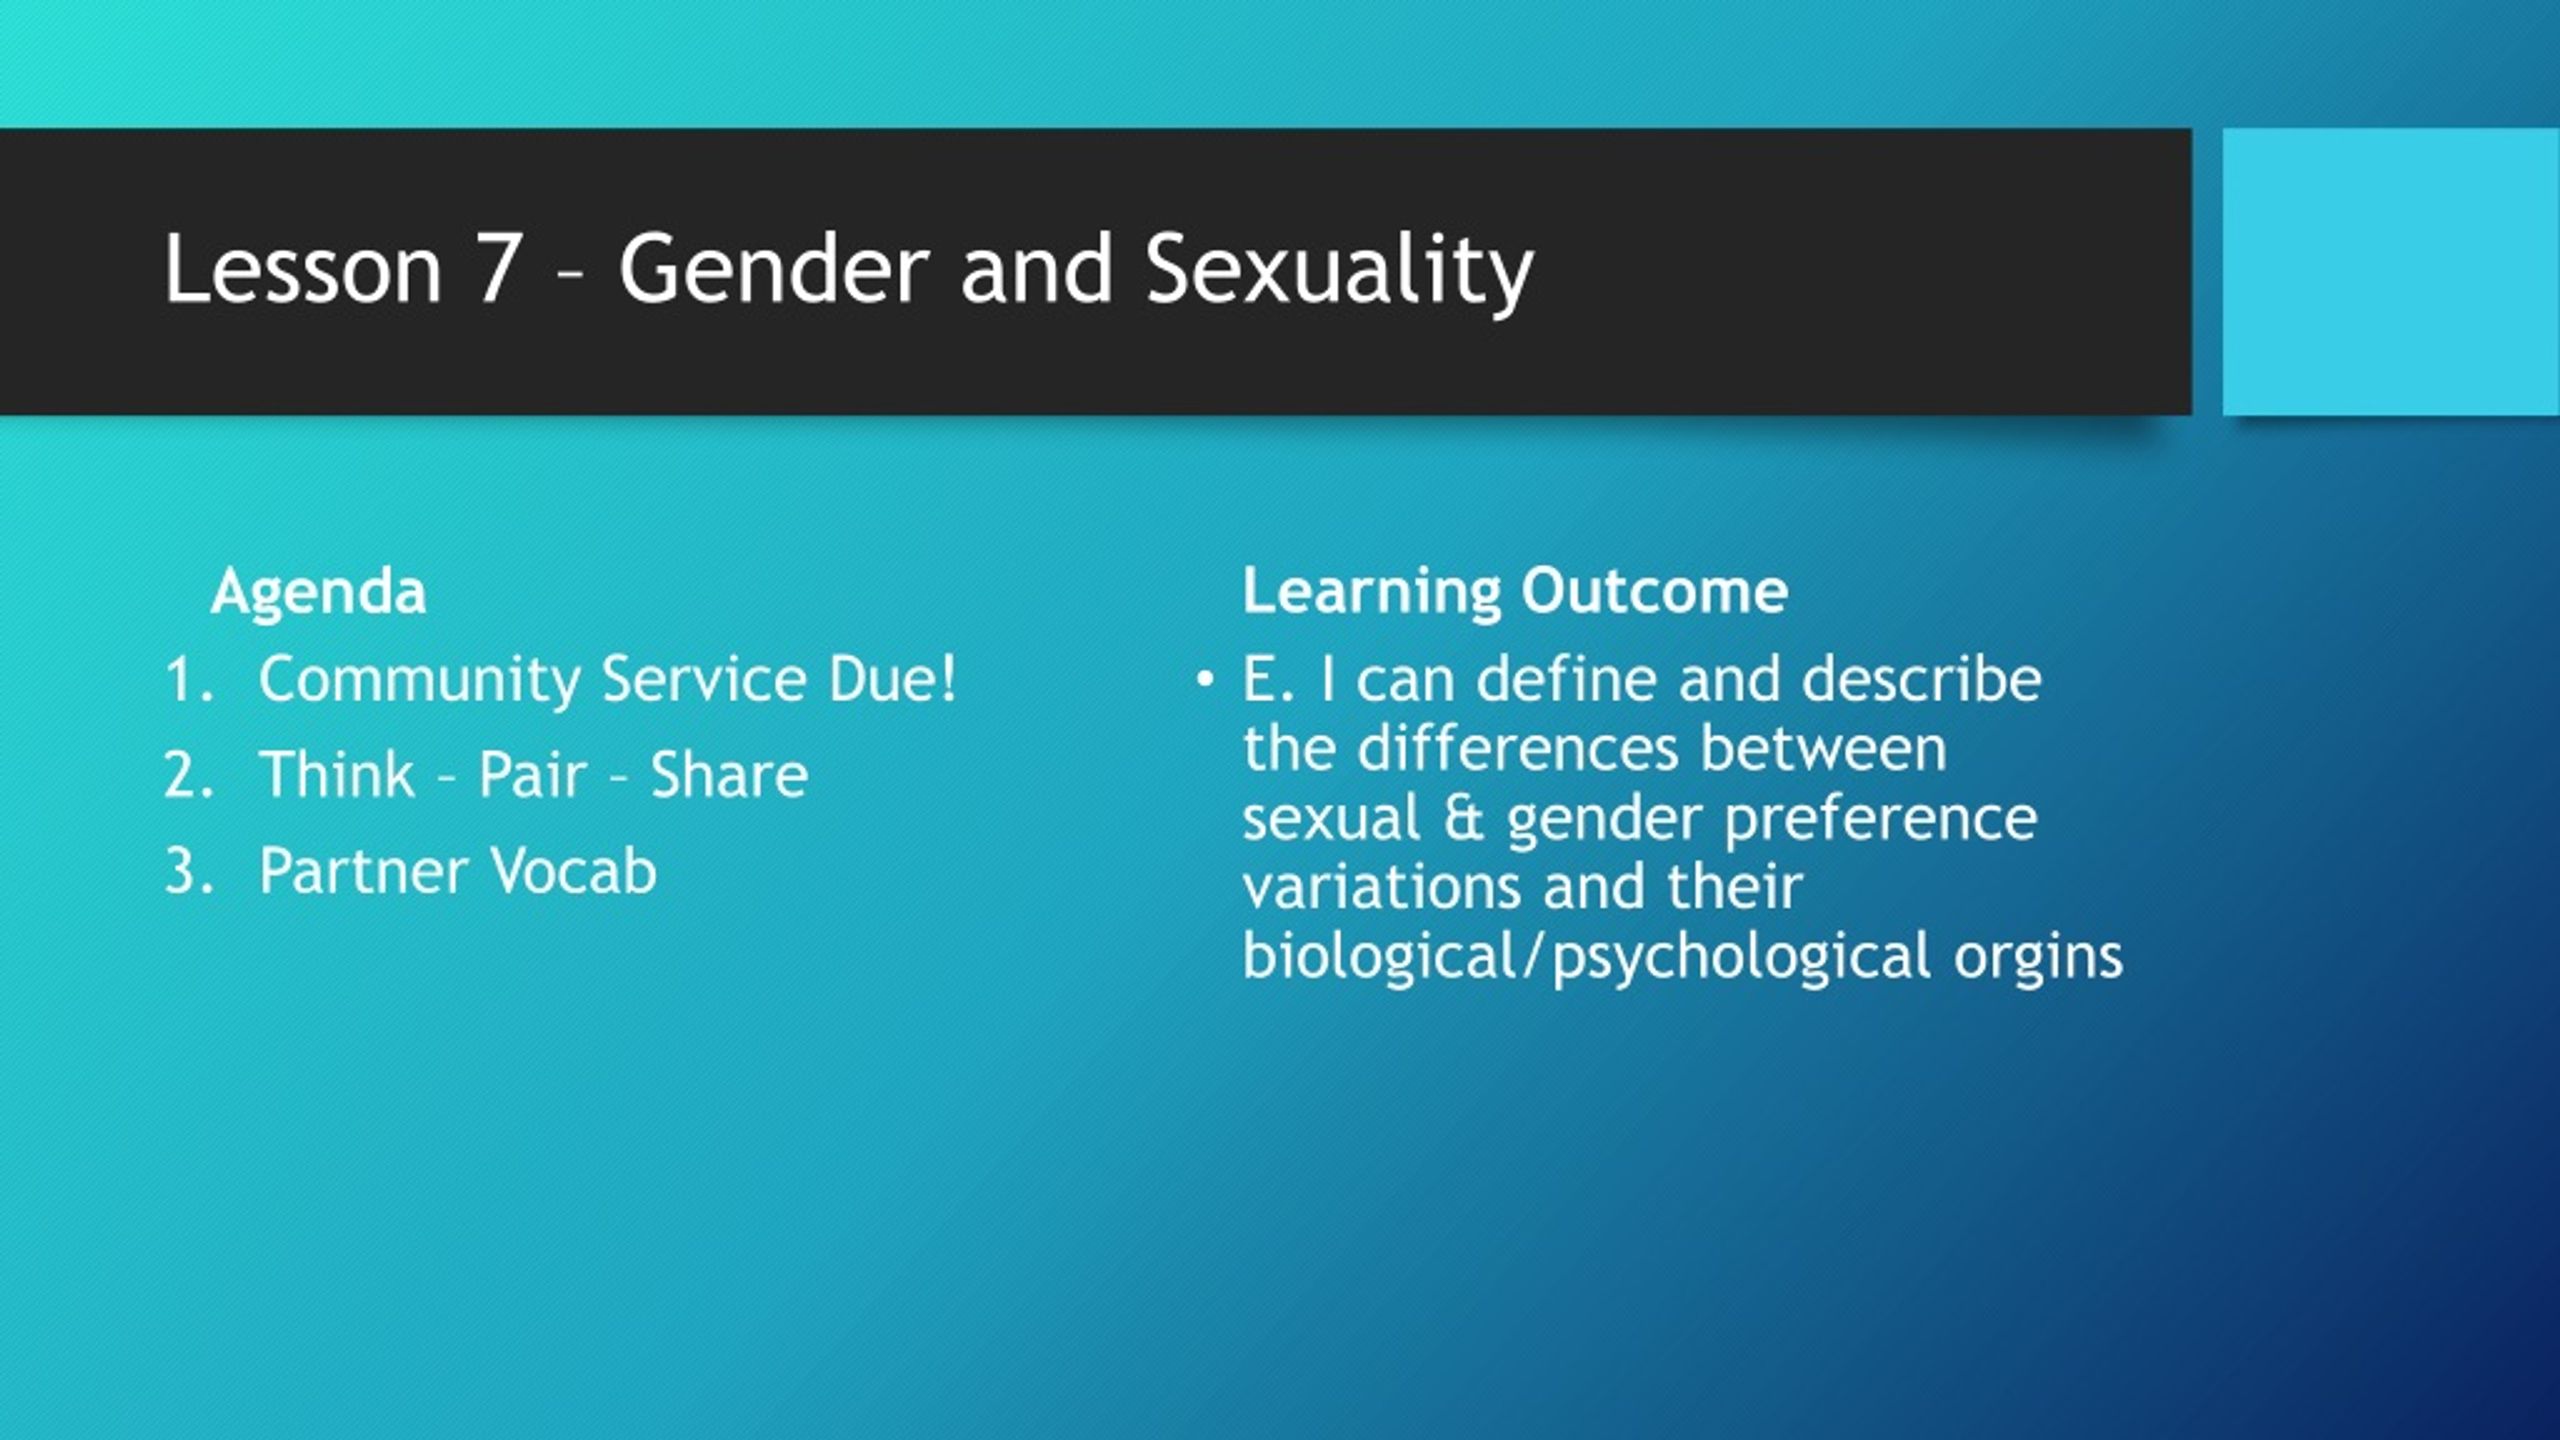 Ppt Lesson 7 Gender And Sexuality Powerpoint Presentation Free Download Id9001422 